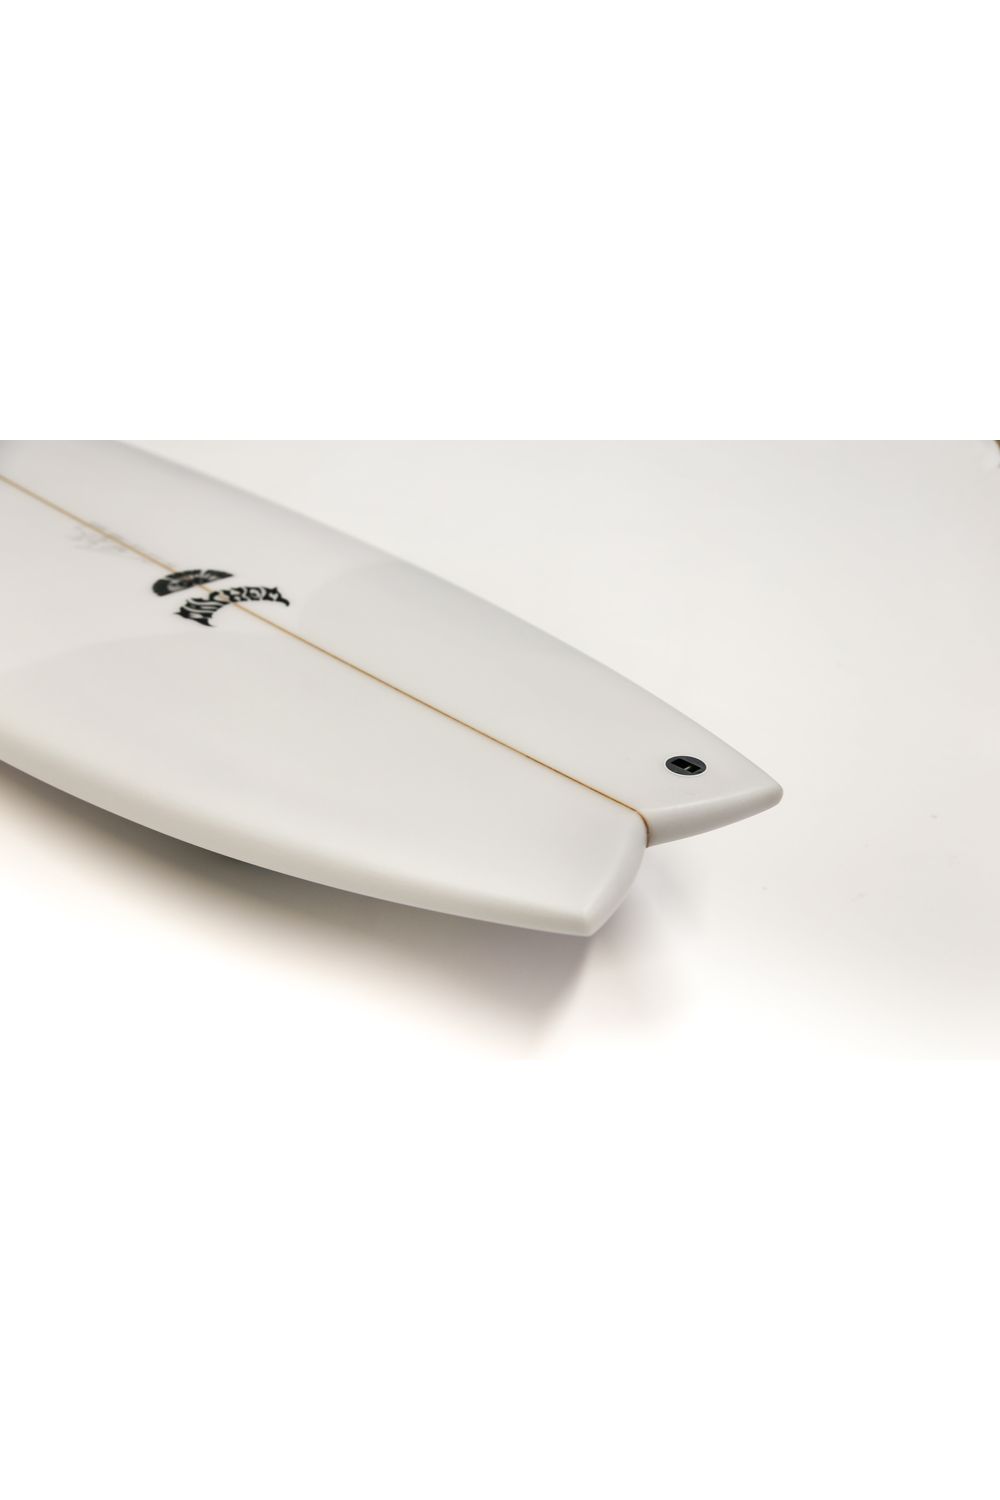 Lost Round Nose Fish 96, 5'8 Surfboard 33.50L PU Futures 3 Fins